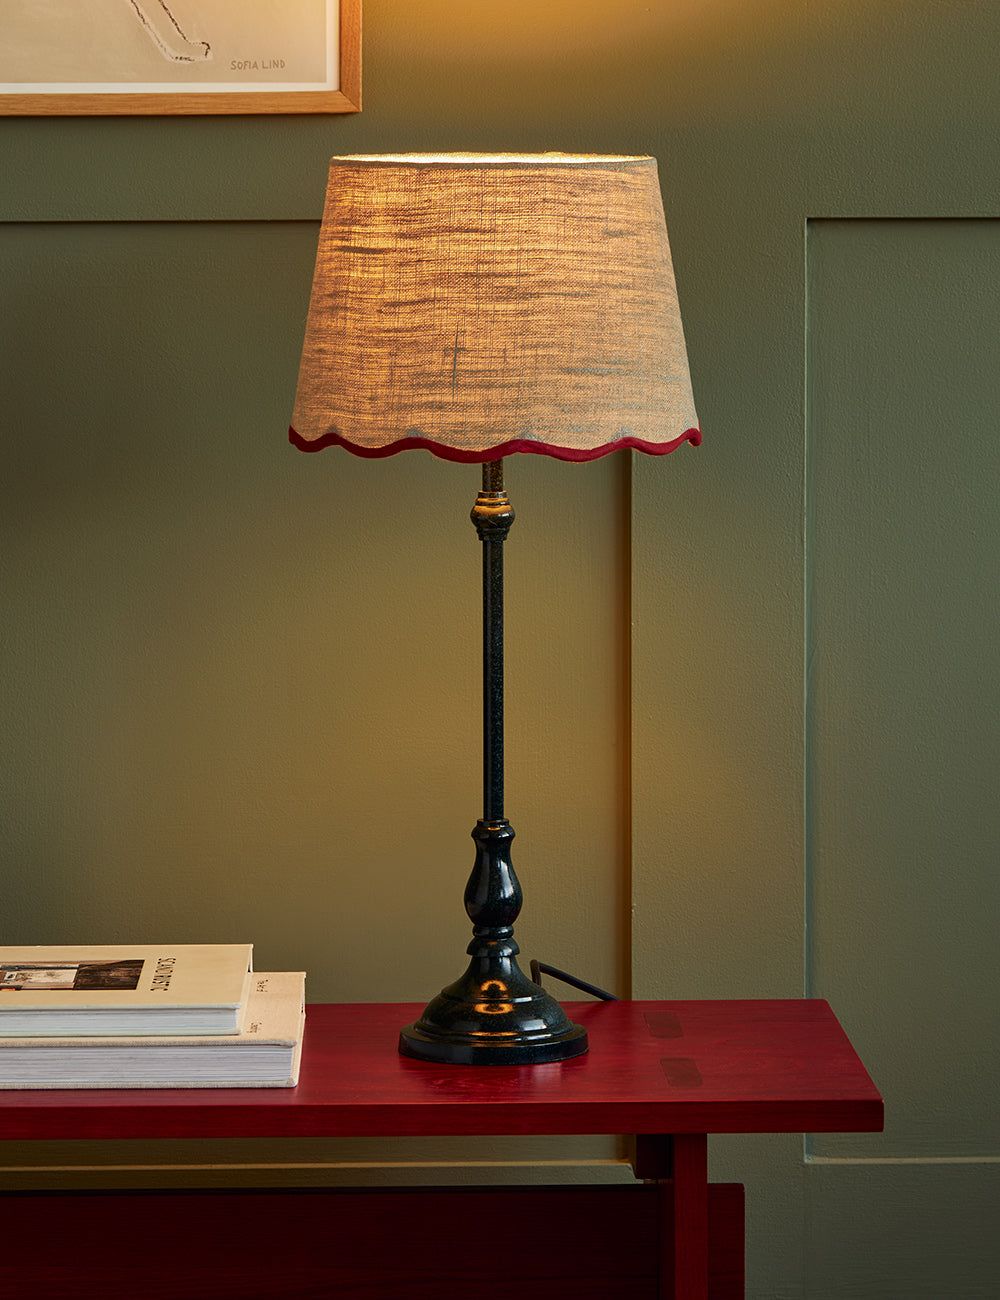 Slim Table Lamp with Red Scalloped Shade